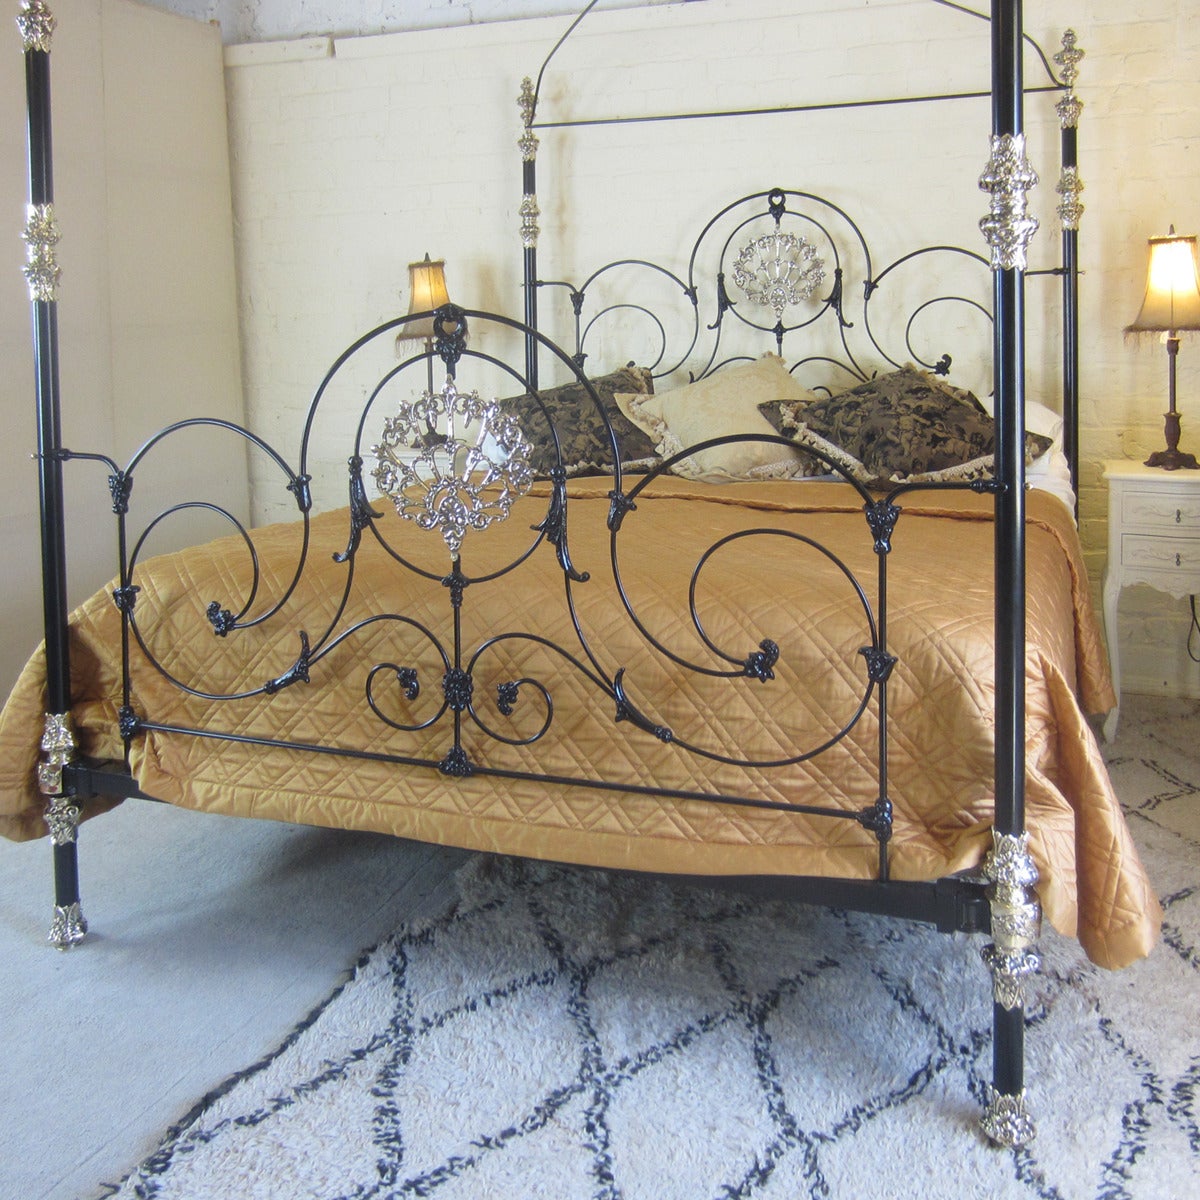 A magnificent four poster bedstead copied from a very unusual and rare piece, which was originally ordered by a top British rock star. This reproduction was later commissioned by Bergdorf Goodman of New York for display in their store on Fifth